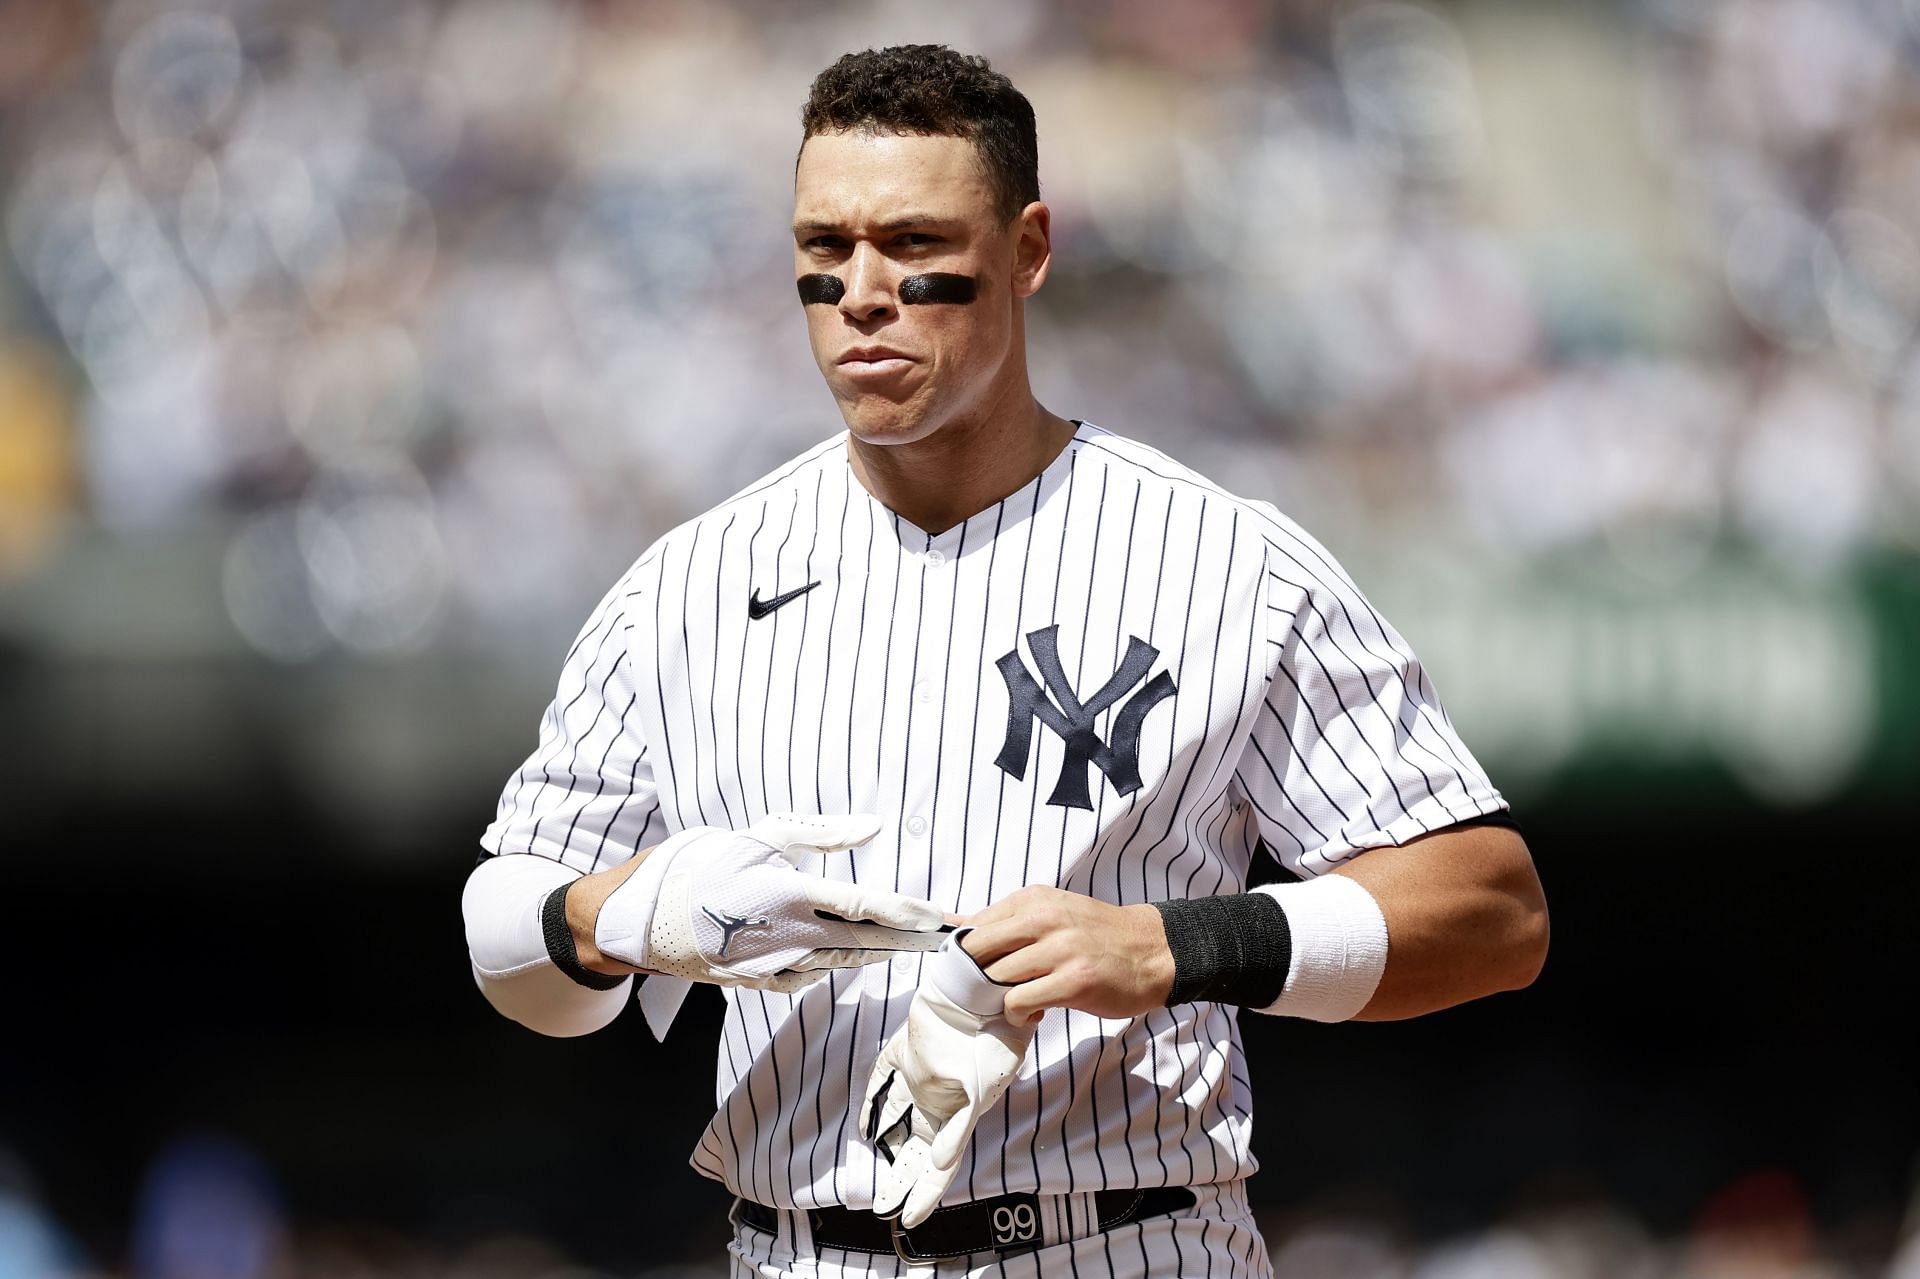 Yankees' Stanton laments recent stretch: 'I didn't do my part